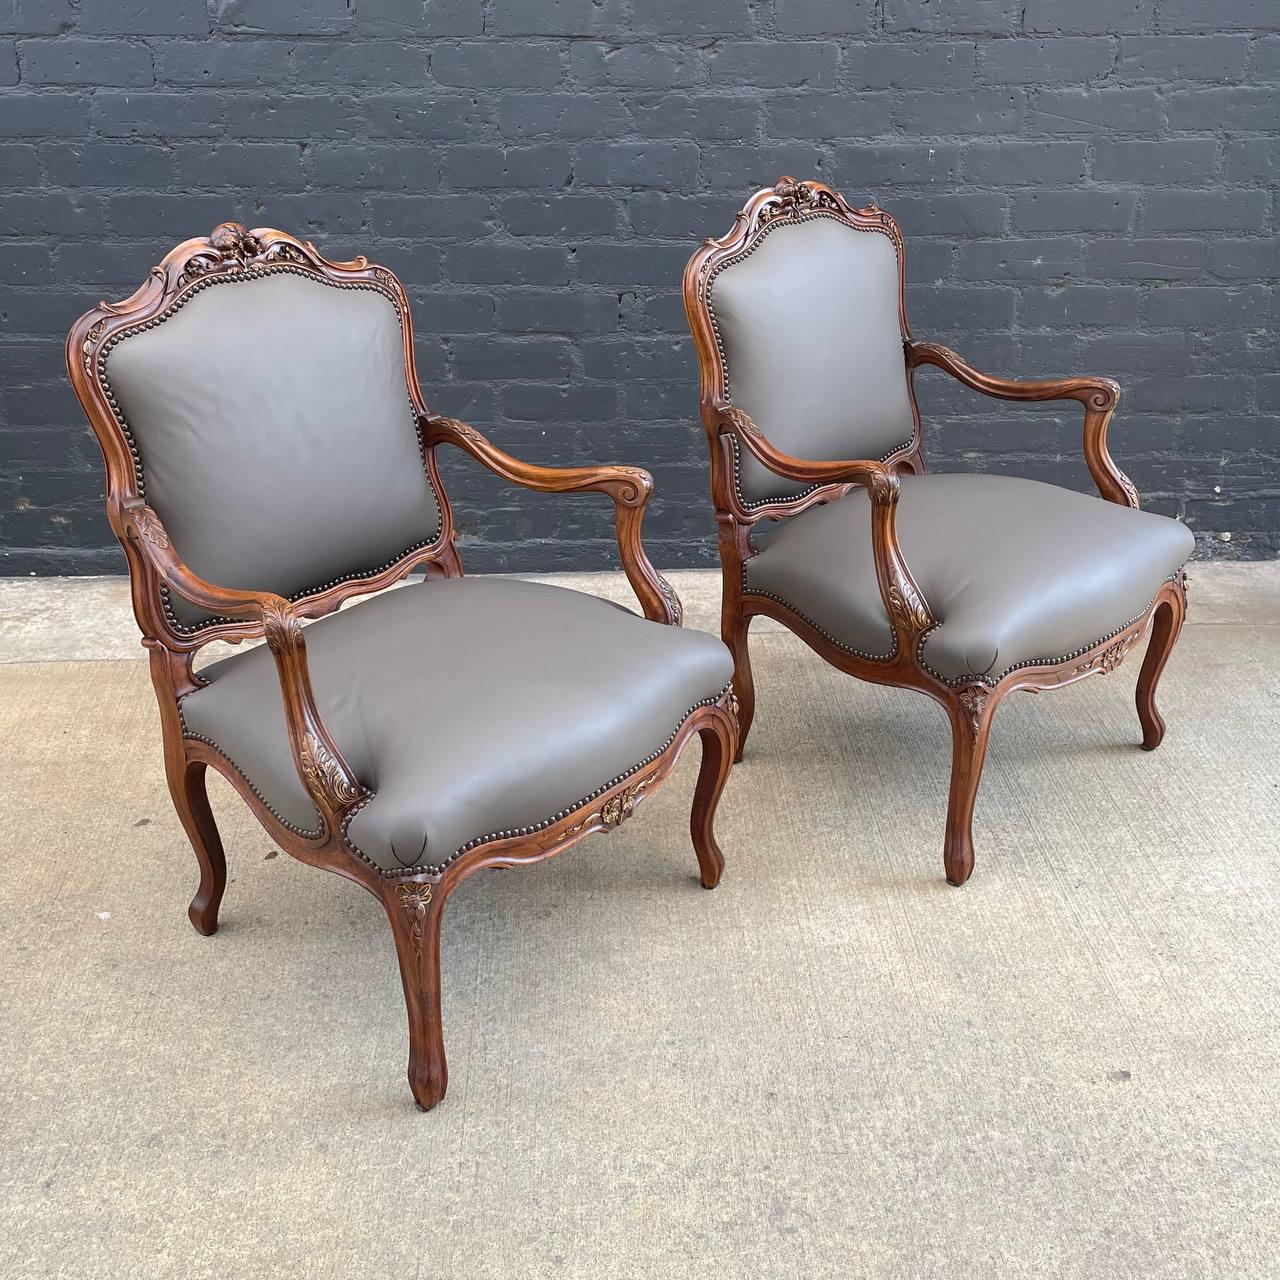 Pair of Antique French Louis XVI Carved Wood & Leather Arm Chairs

Designer: Unknwon
Country: France
Manufacturer: Unknown
Materials: Carved Wood, Leather
Style: French Louis XVI
Year: 1920’s

$3,500 pair 

Dimensions:
39”H x 27”W x